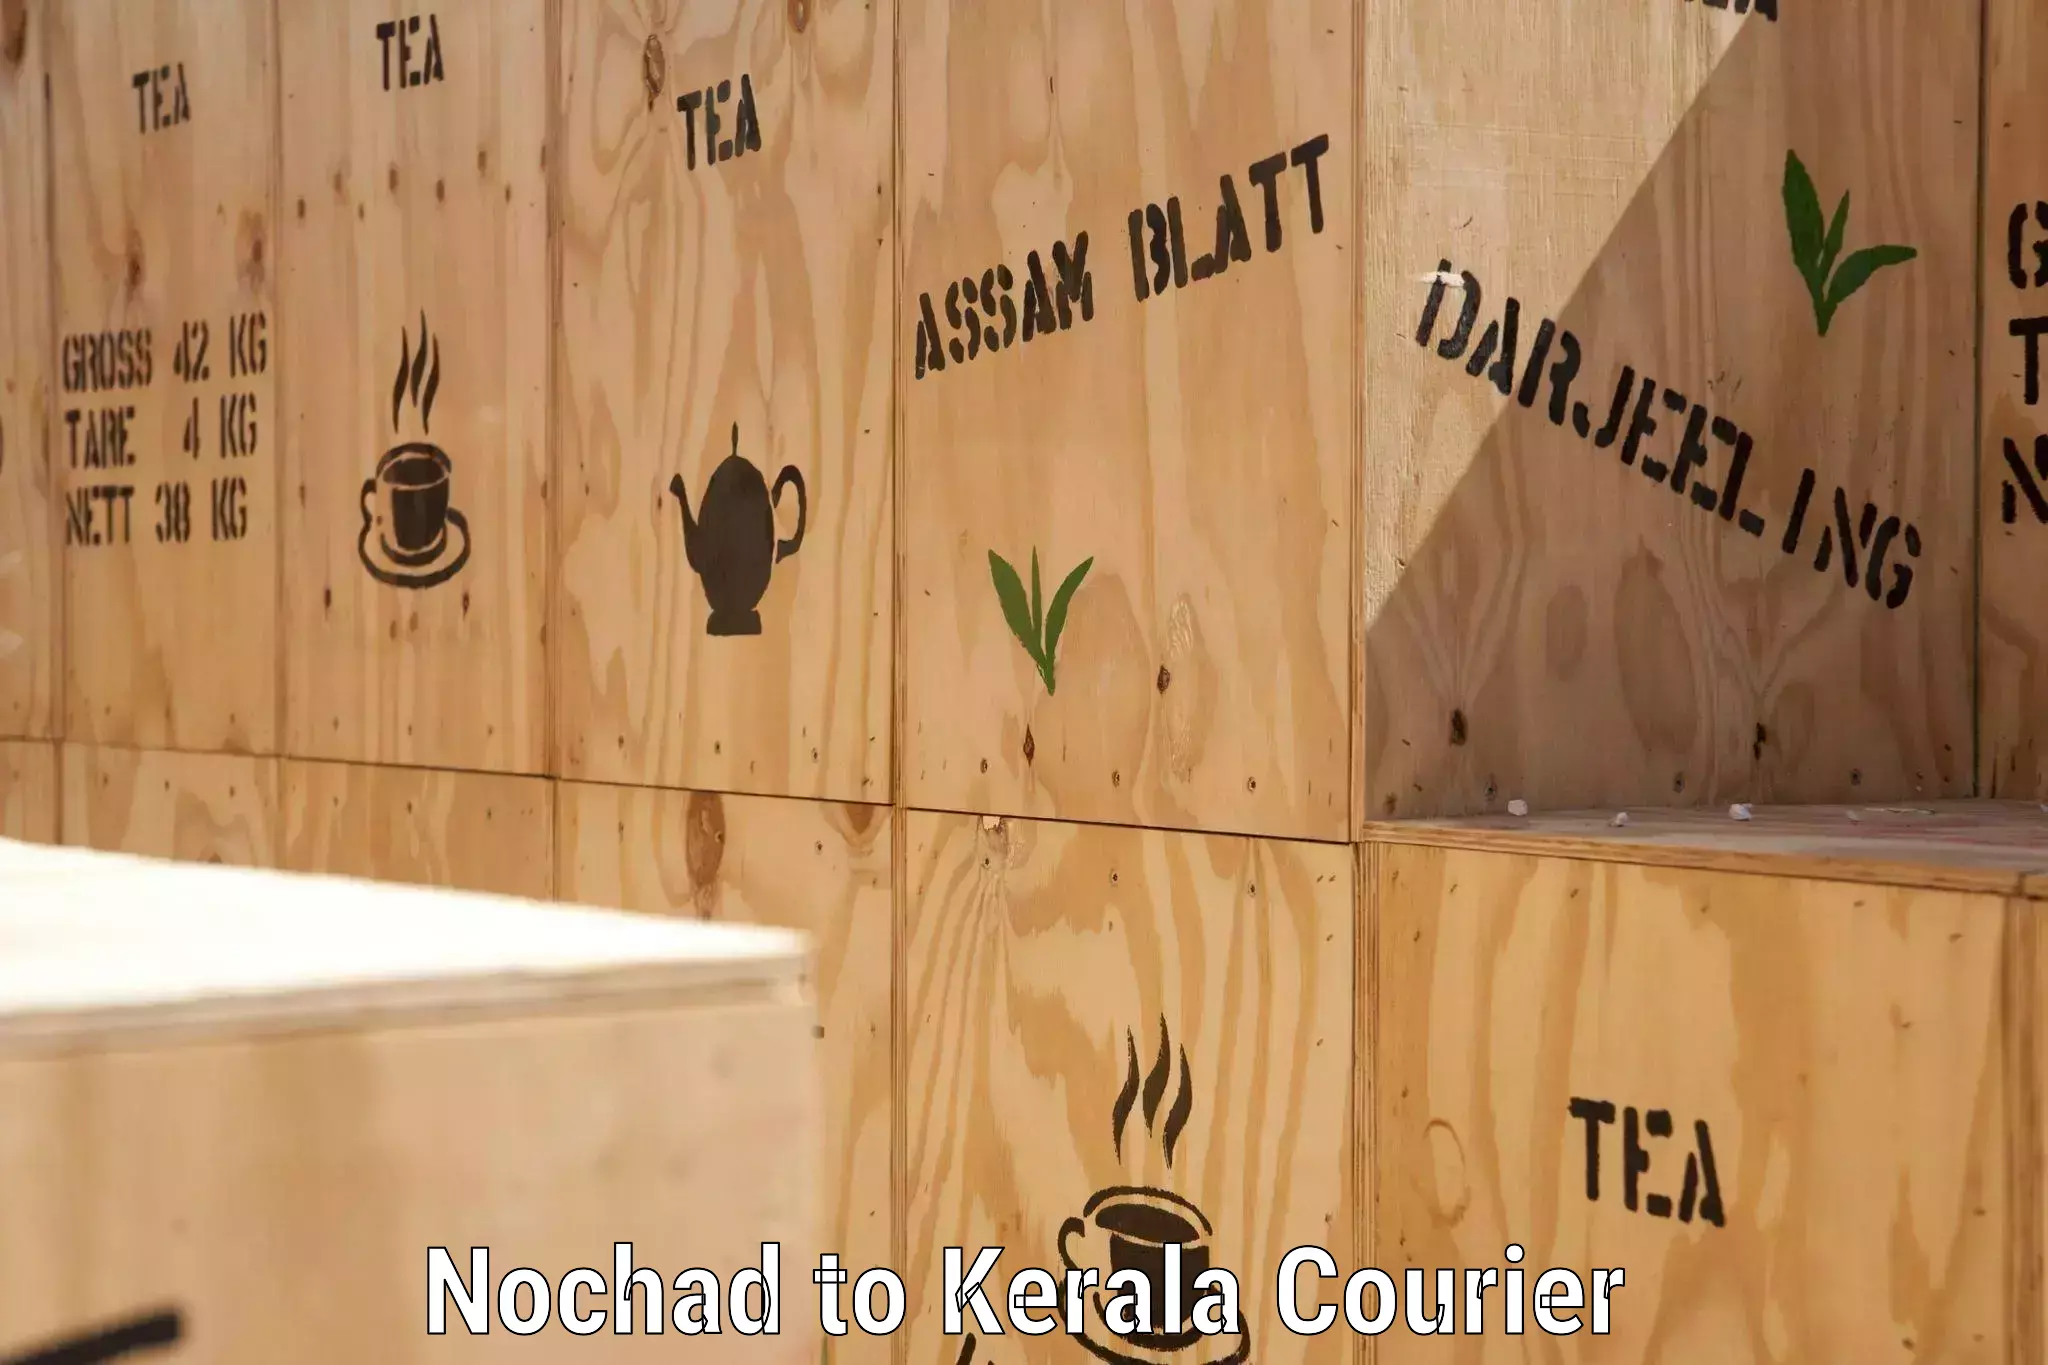 Global courier networks Nochad to Kerala